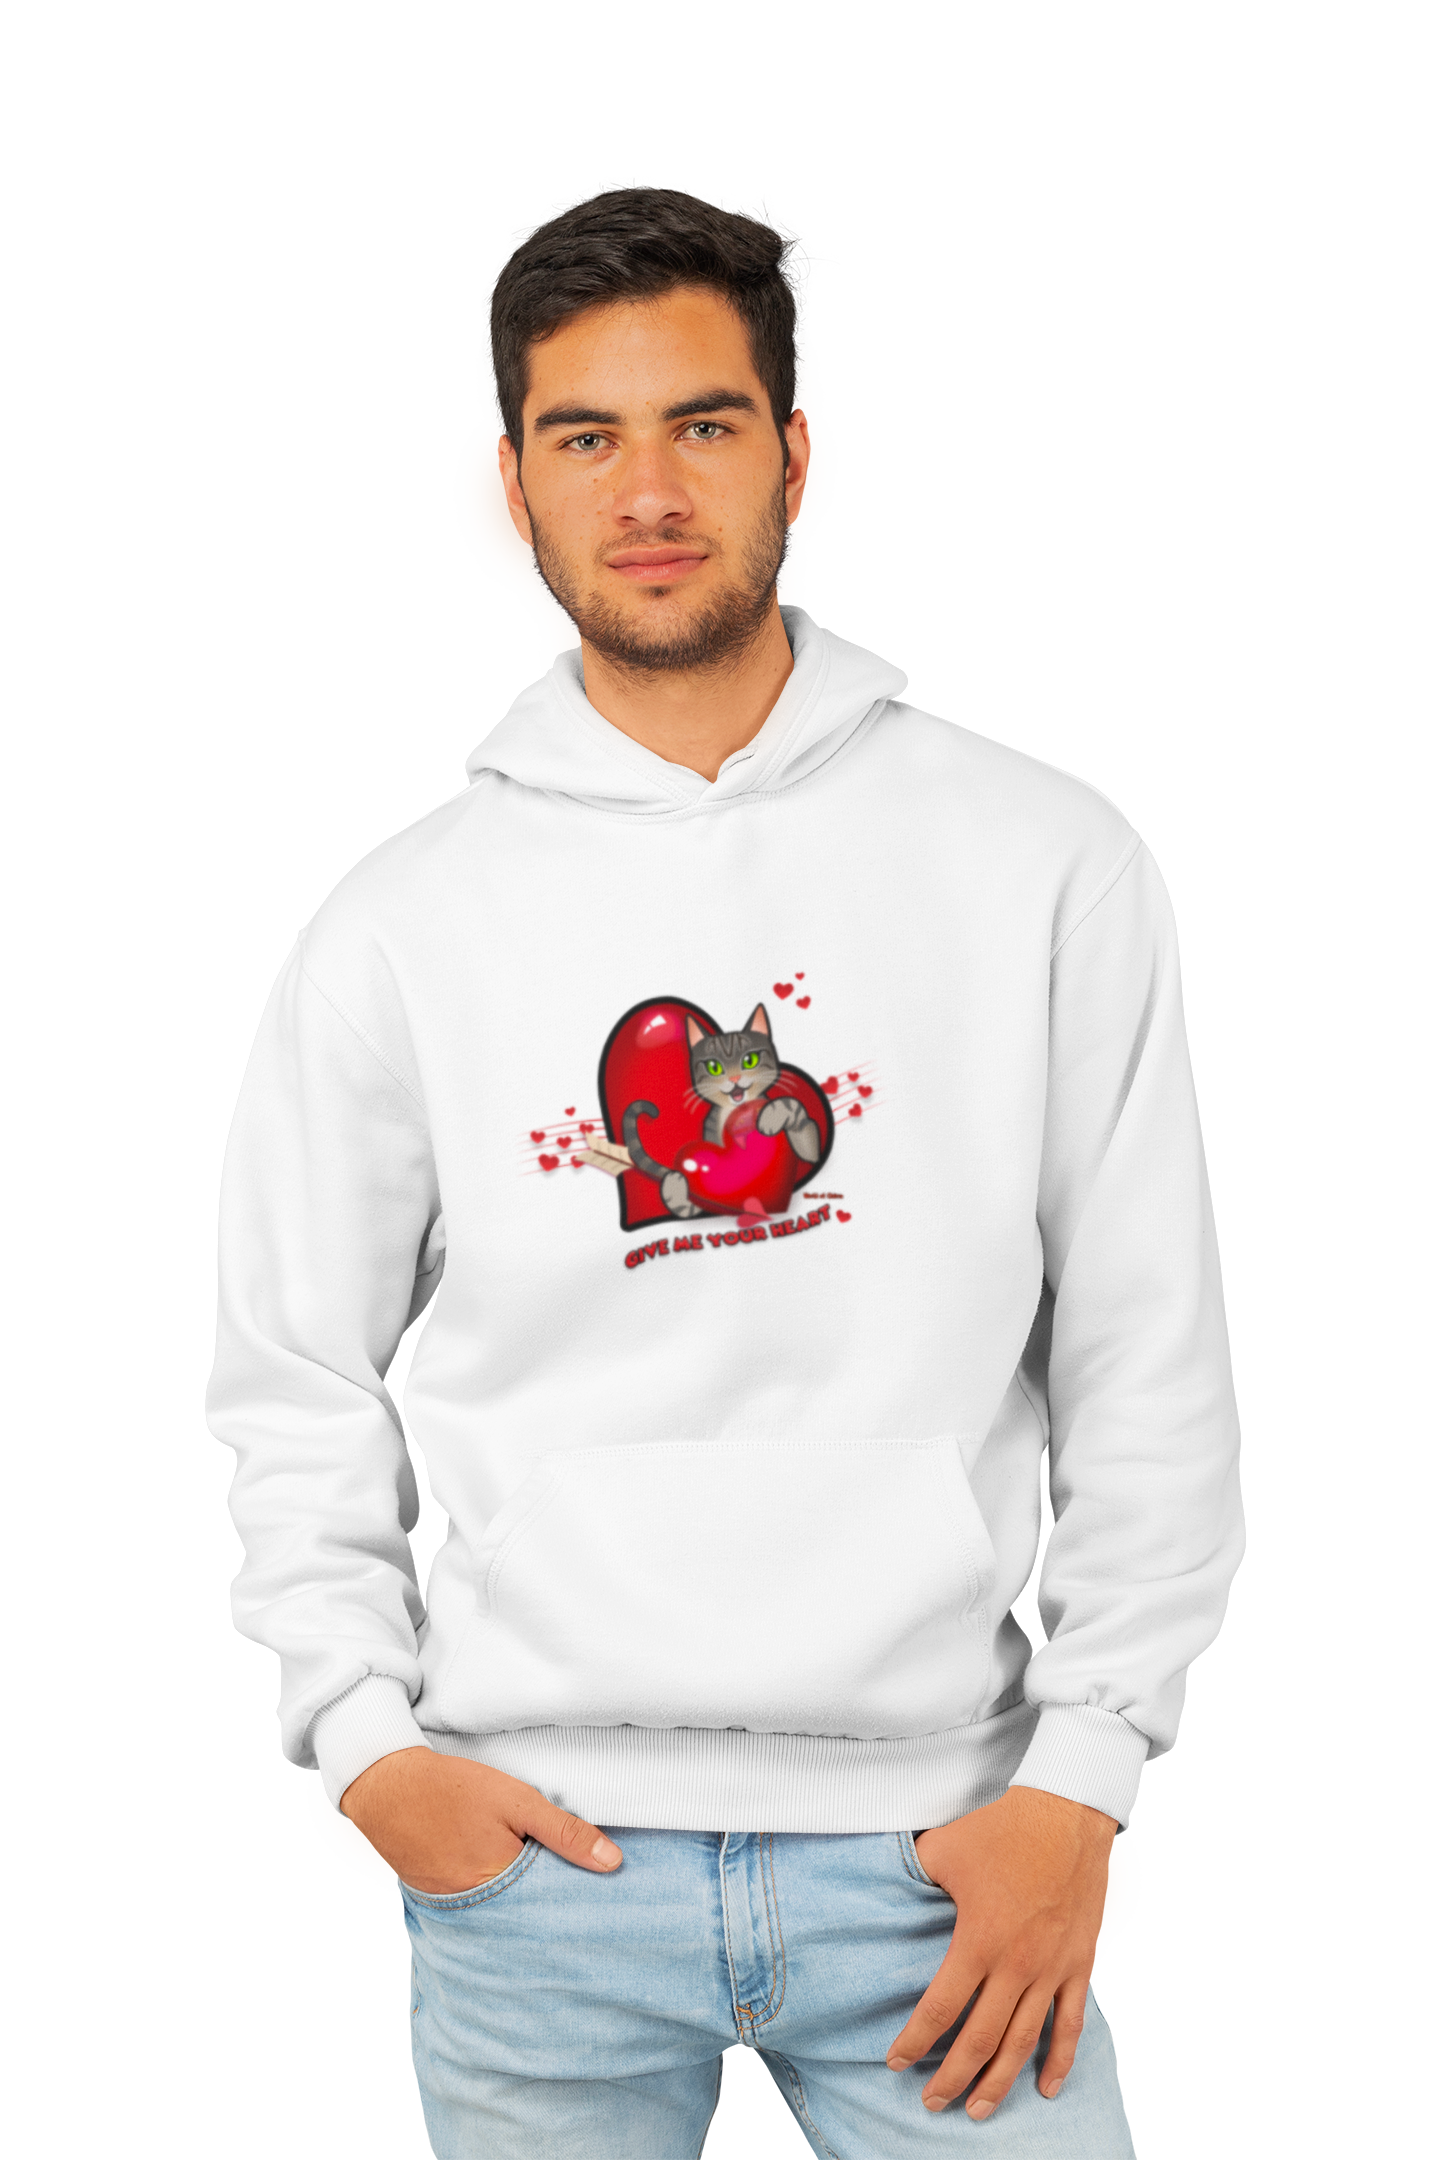 Unisex Organic Hoodie - "Give Me Your Heart"